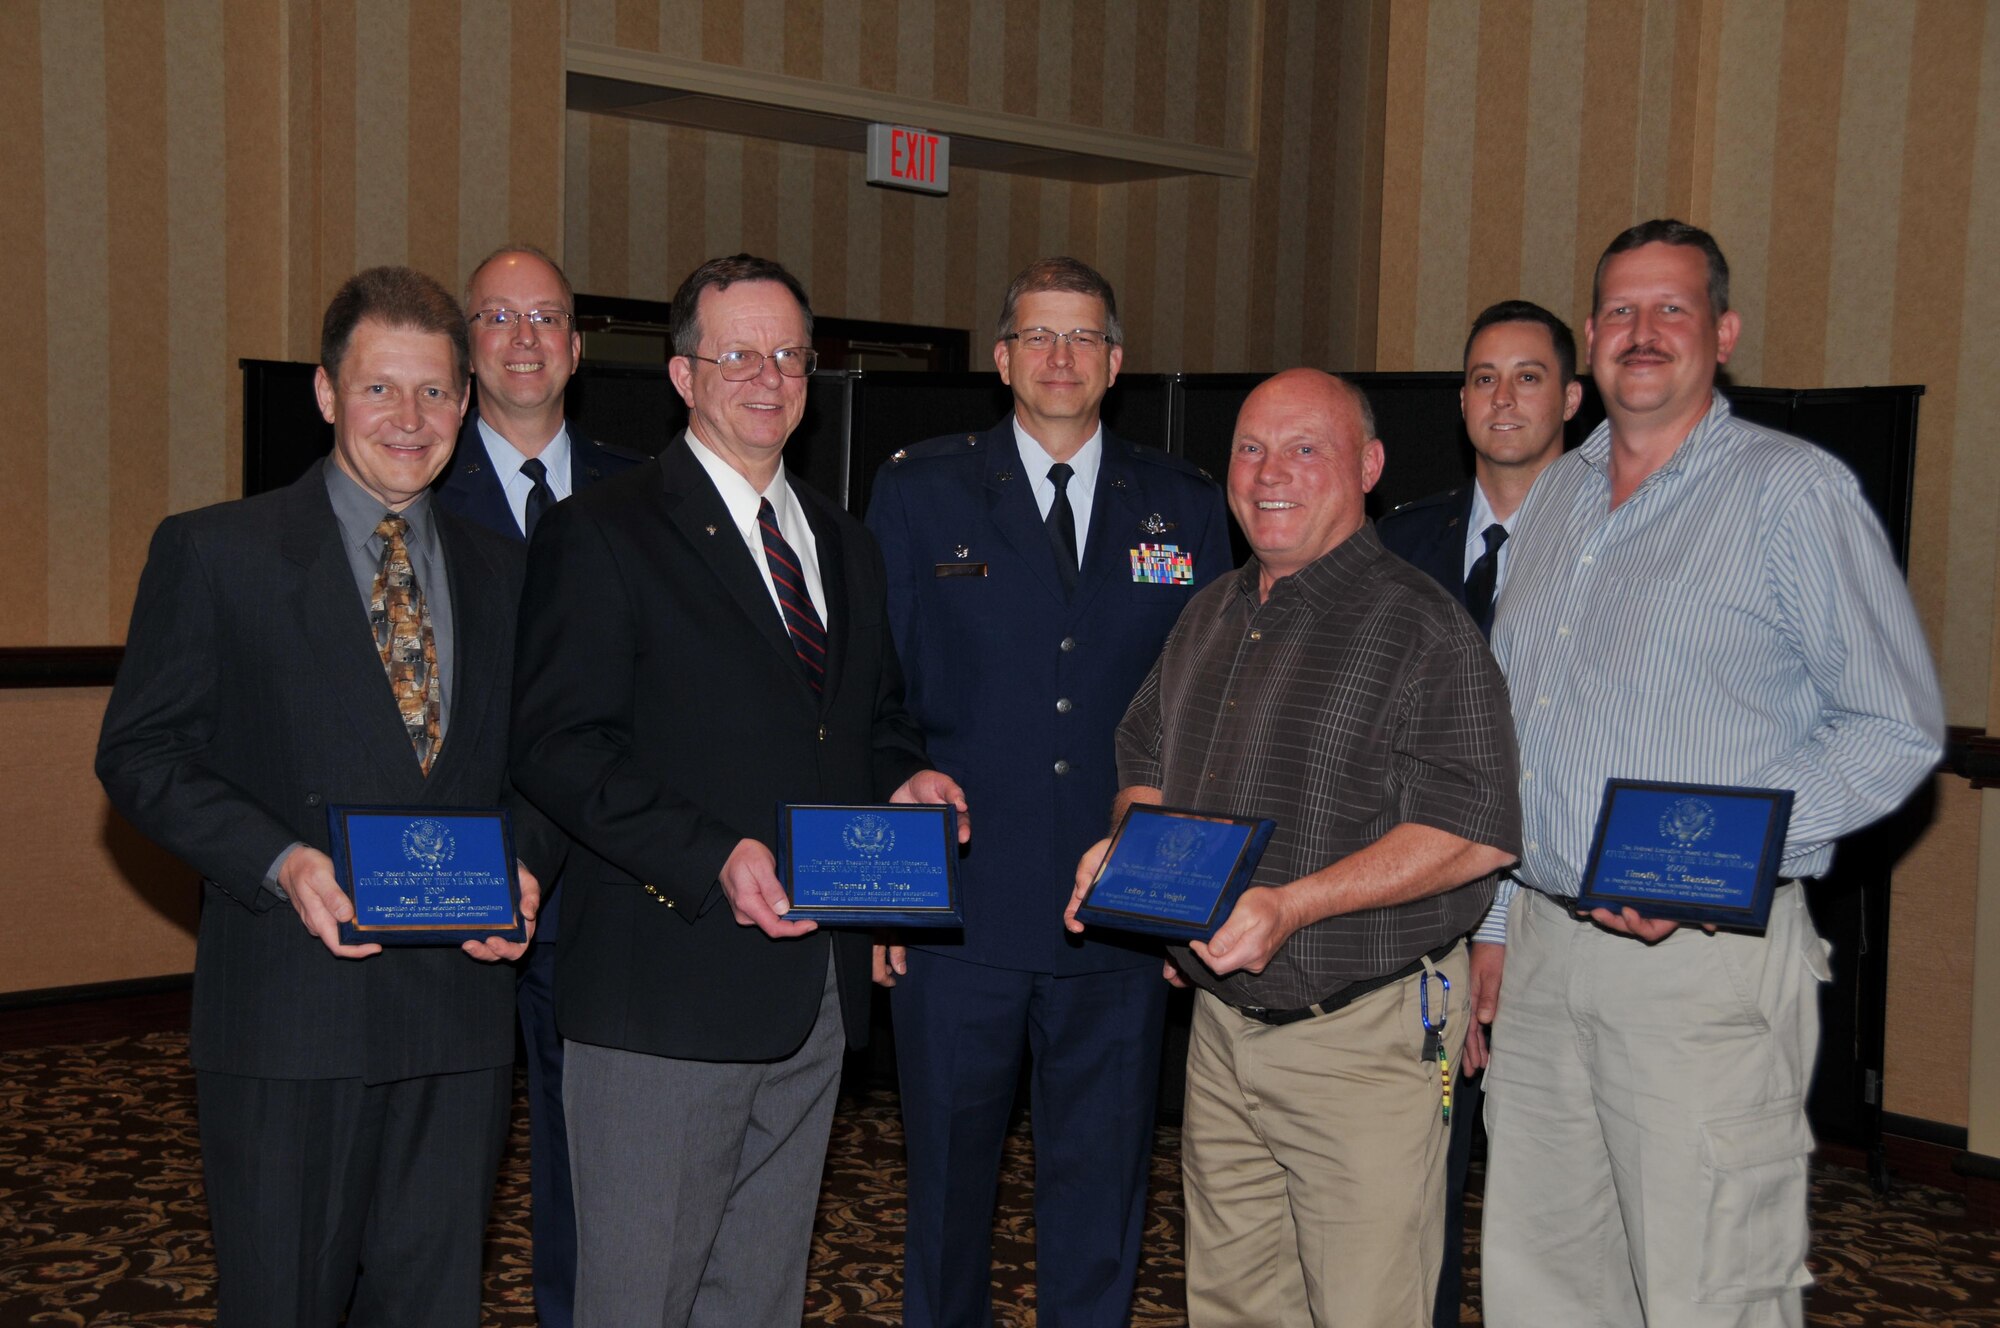 The Federal Executive Board recognized the 934th Airlift Wing Civil Servants of the Year at a ceremony May 8. Winners from front left are: Paul Zadach, Public Affairs, professional category; Thomas Theis, Maintenance, community category; LeRoy
Voight, Financial Management, administrative category and Timothy Stansbury, Maintenance, skilled trades
category. Back is Col. Eric Brandes, 934th Maintenance
Group commander, Col. Timothy Tarchick, 934th Airlift Wing commander, and Capt. John Drain, 934th Maintenance Squadron commander. (AirForce Photo/Capt. S.J. Brown)